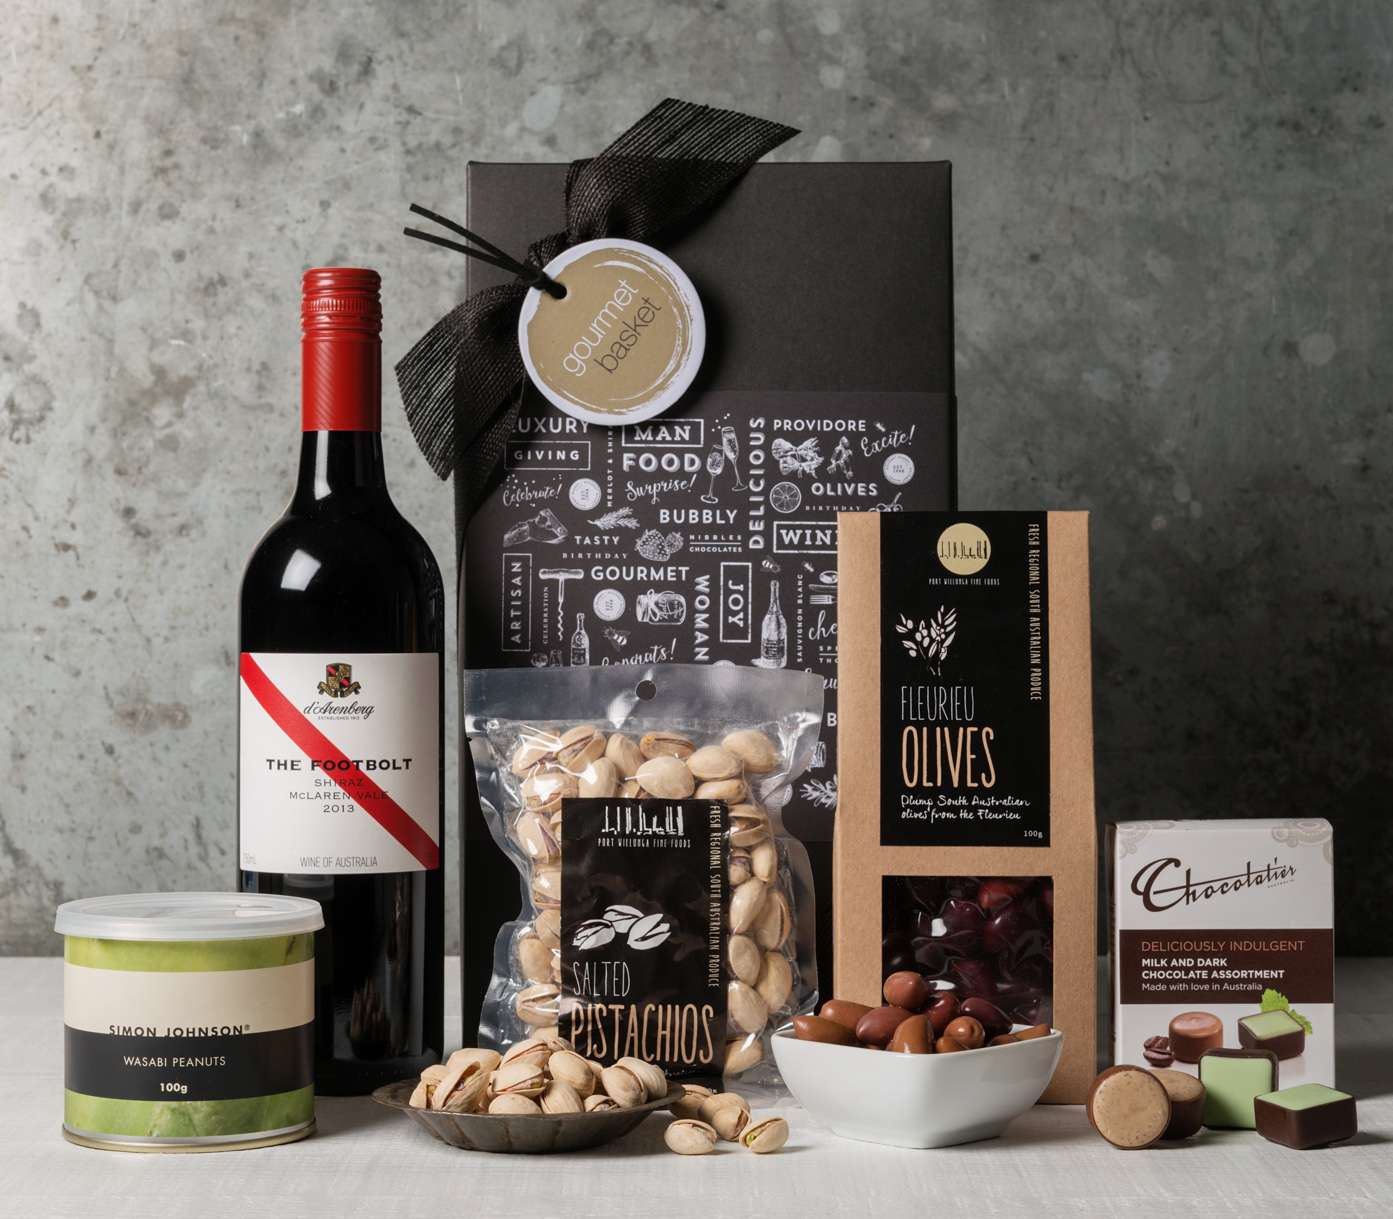 Send a red wine gift basket from Gourmet Basket today